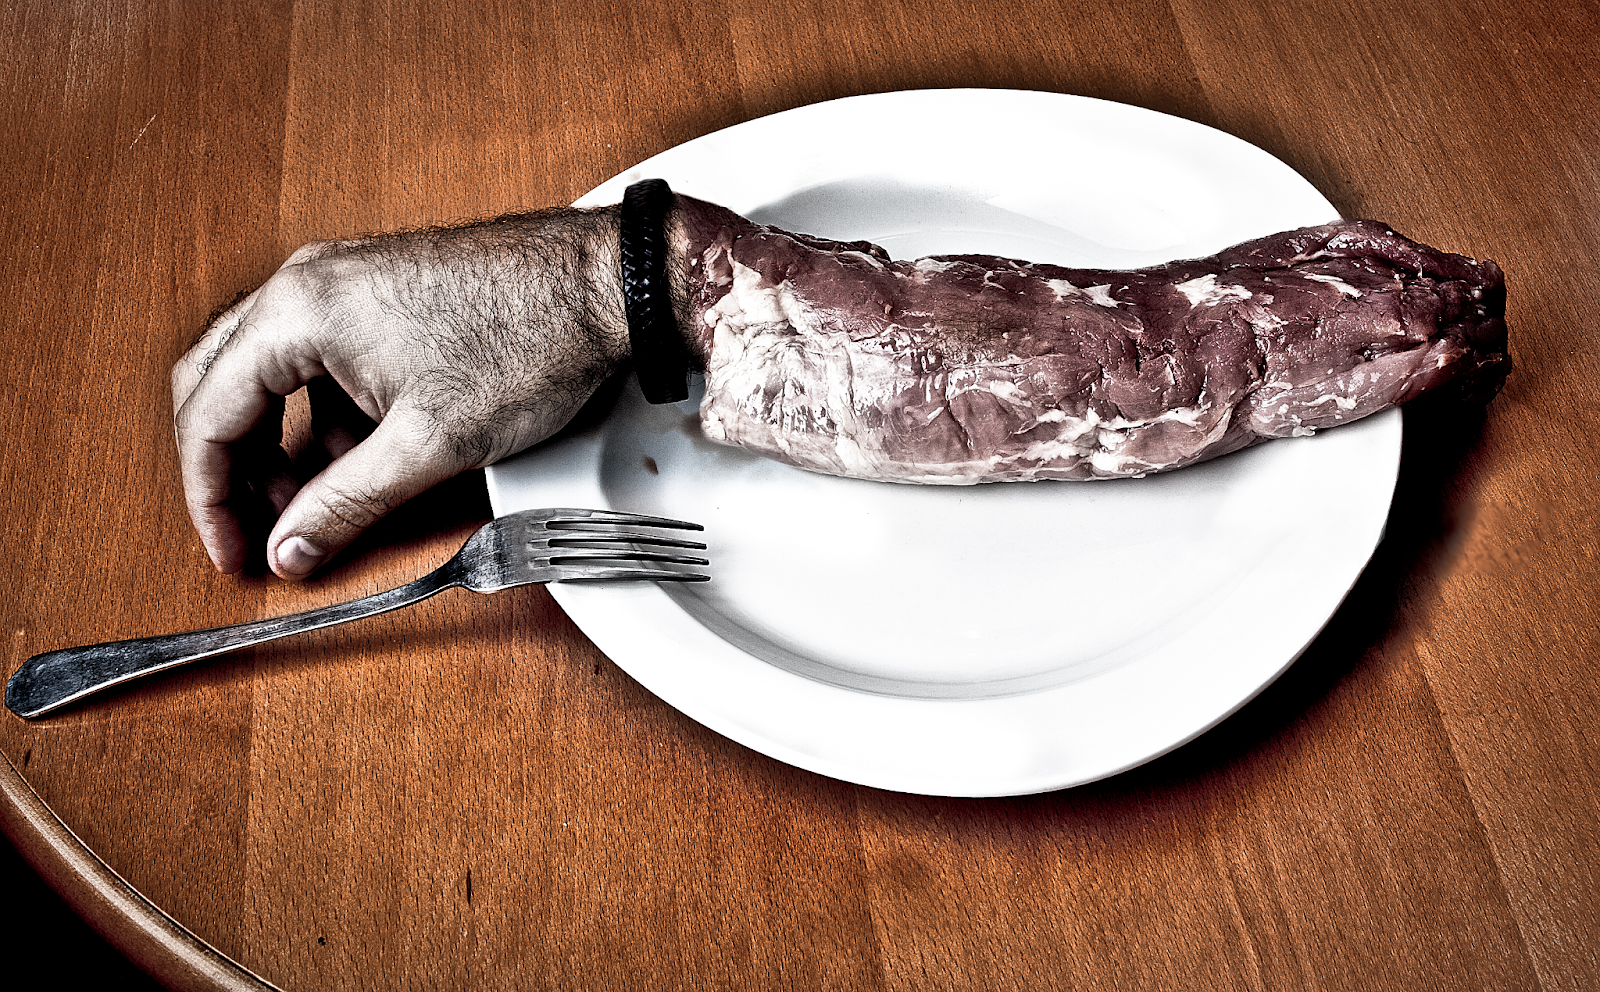 A spooky dinner plate with food resembling a human hand. 